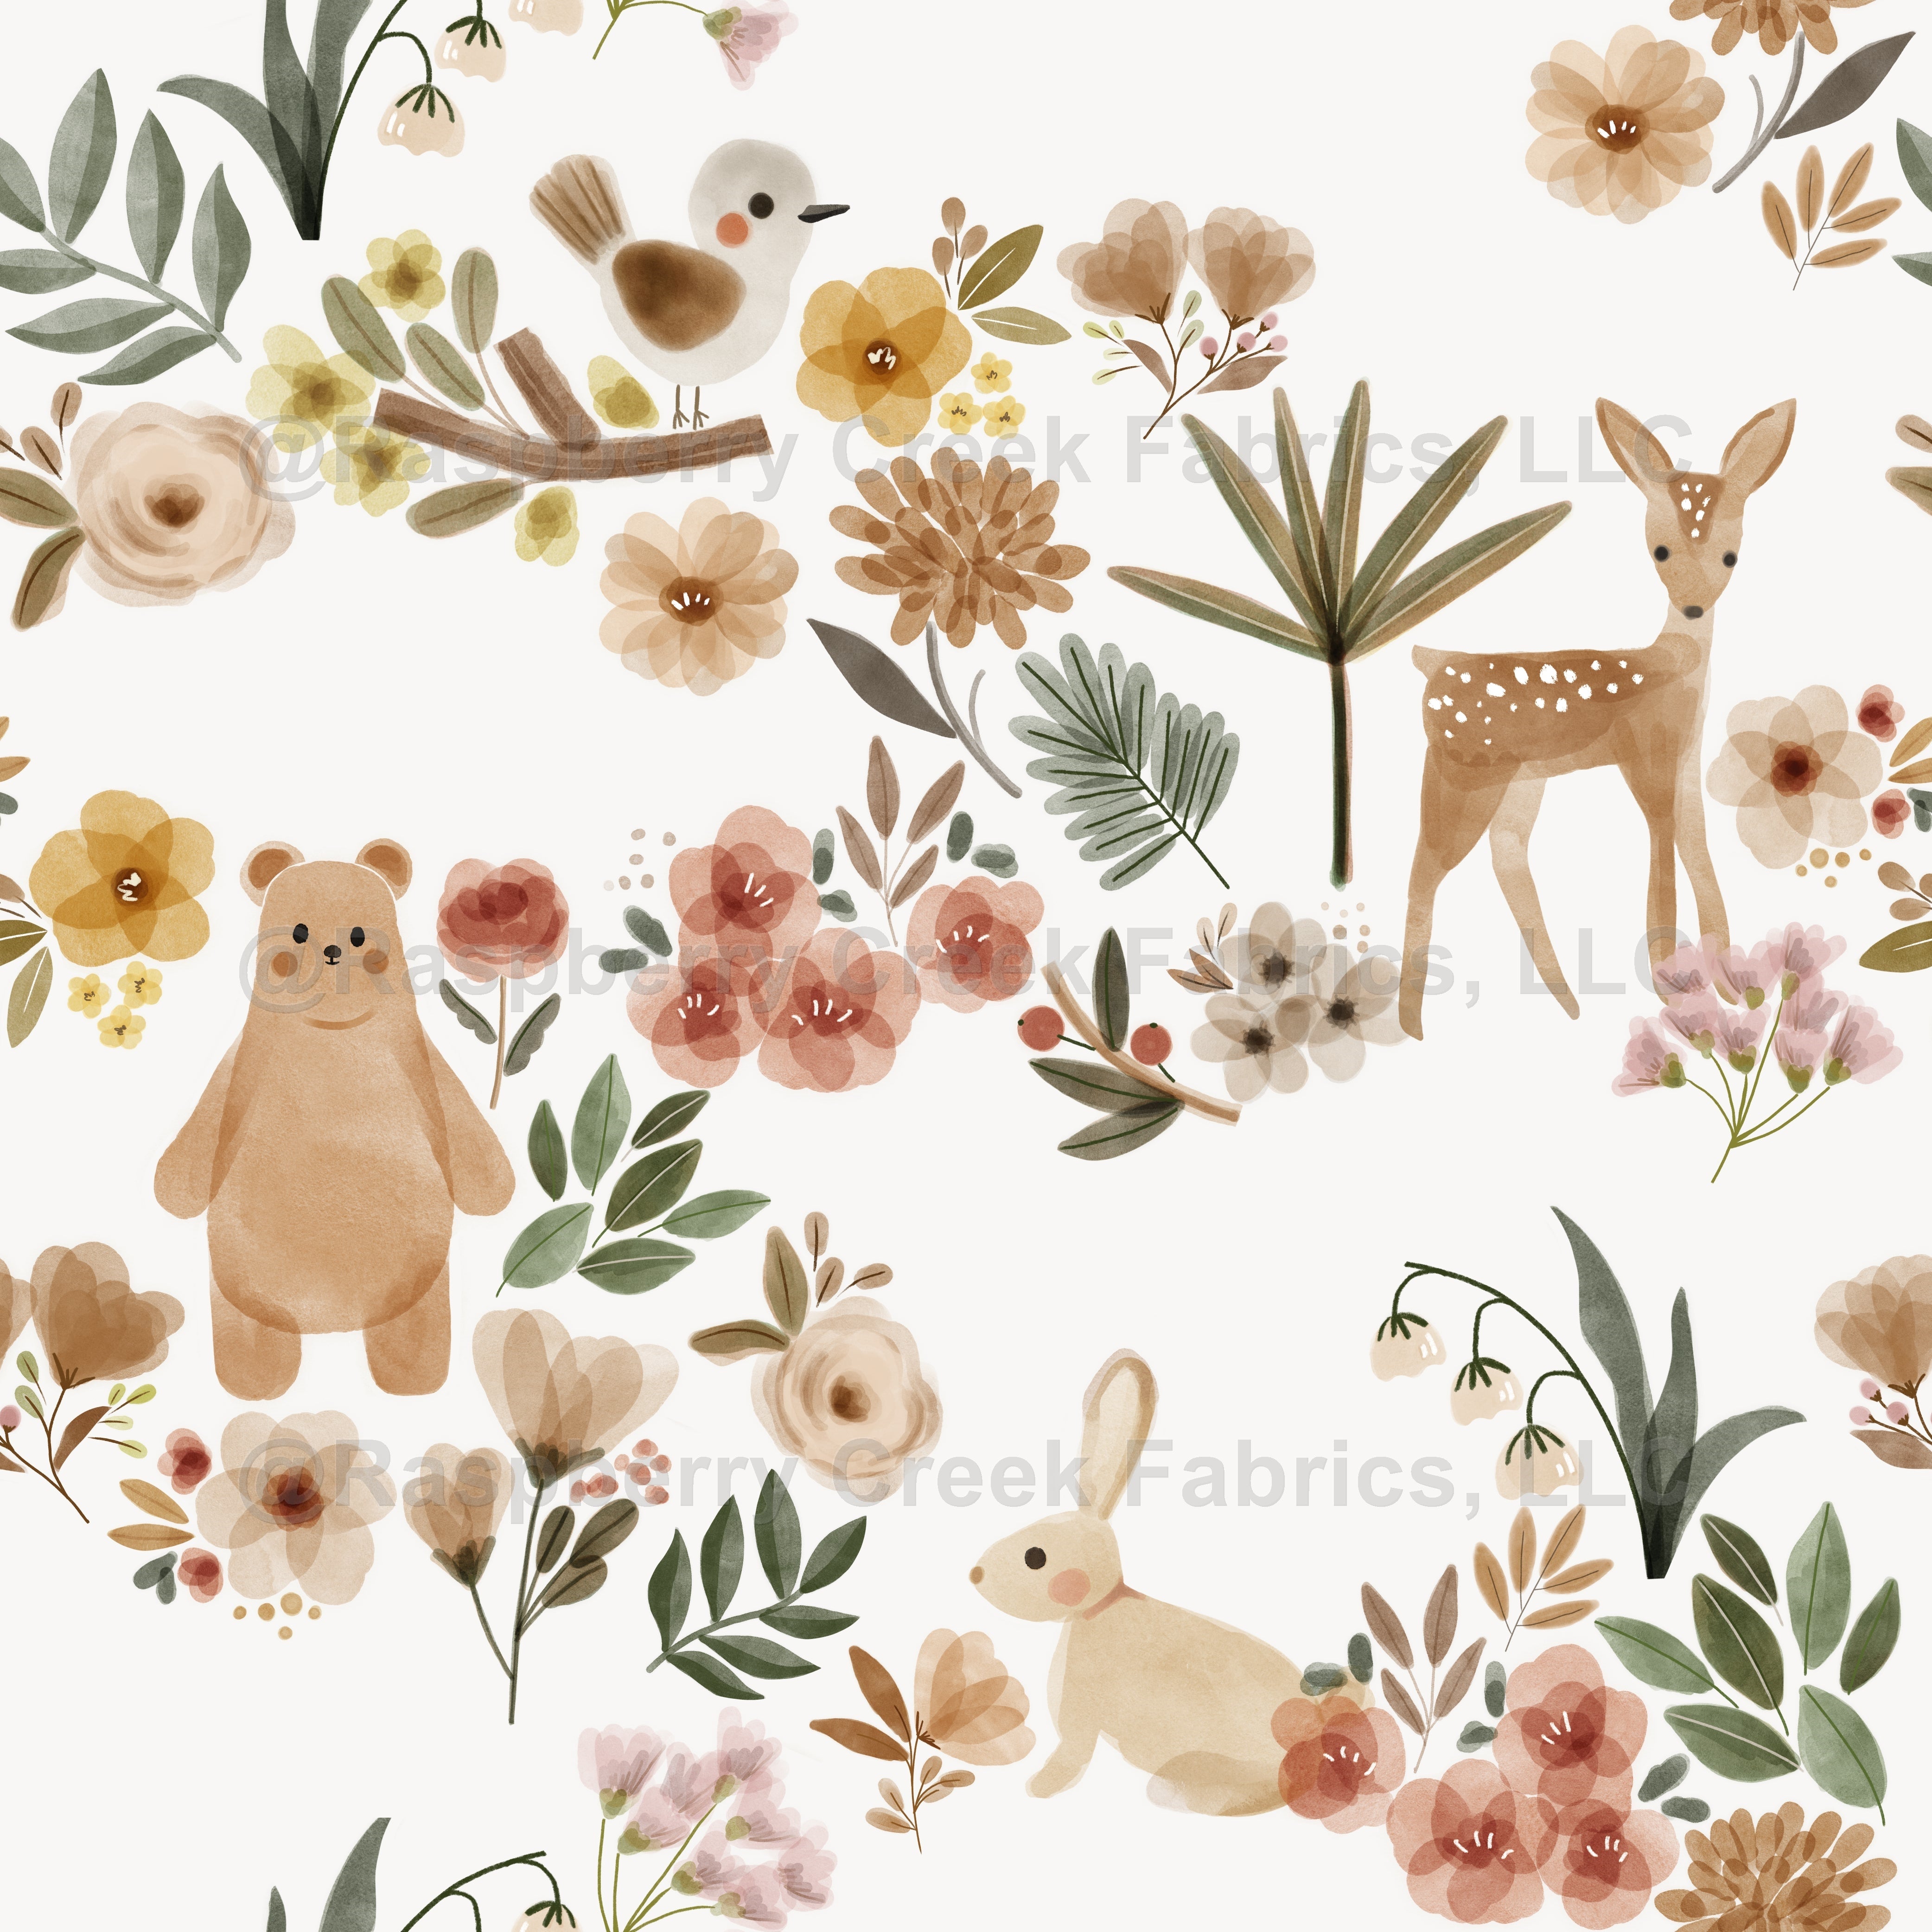 Woodland Party with animals bear, deer, rabbit in neutral Fabric, Raspberry Creek Fabrics, watermarked